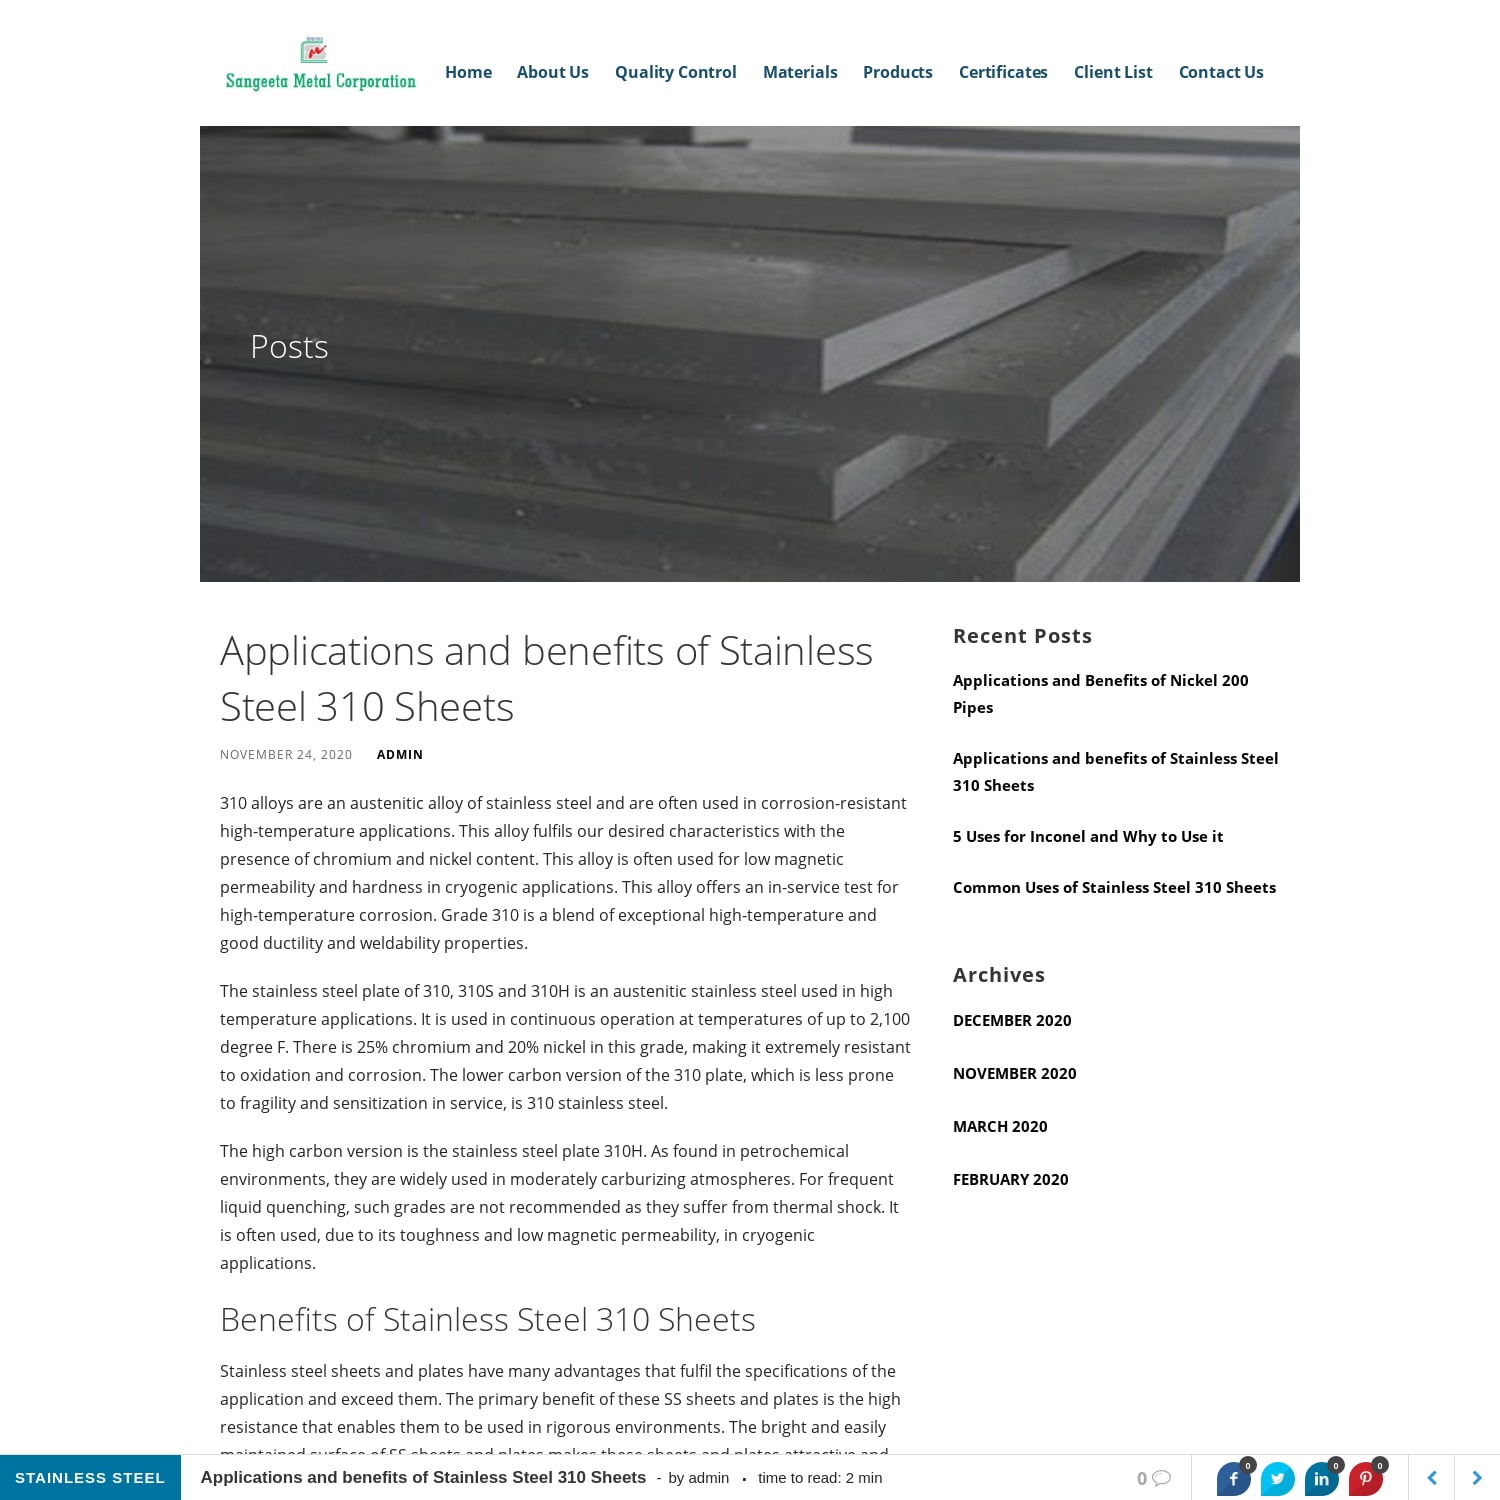 Applications and benefits of Stainless Steel 310 Sheets